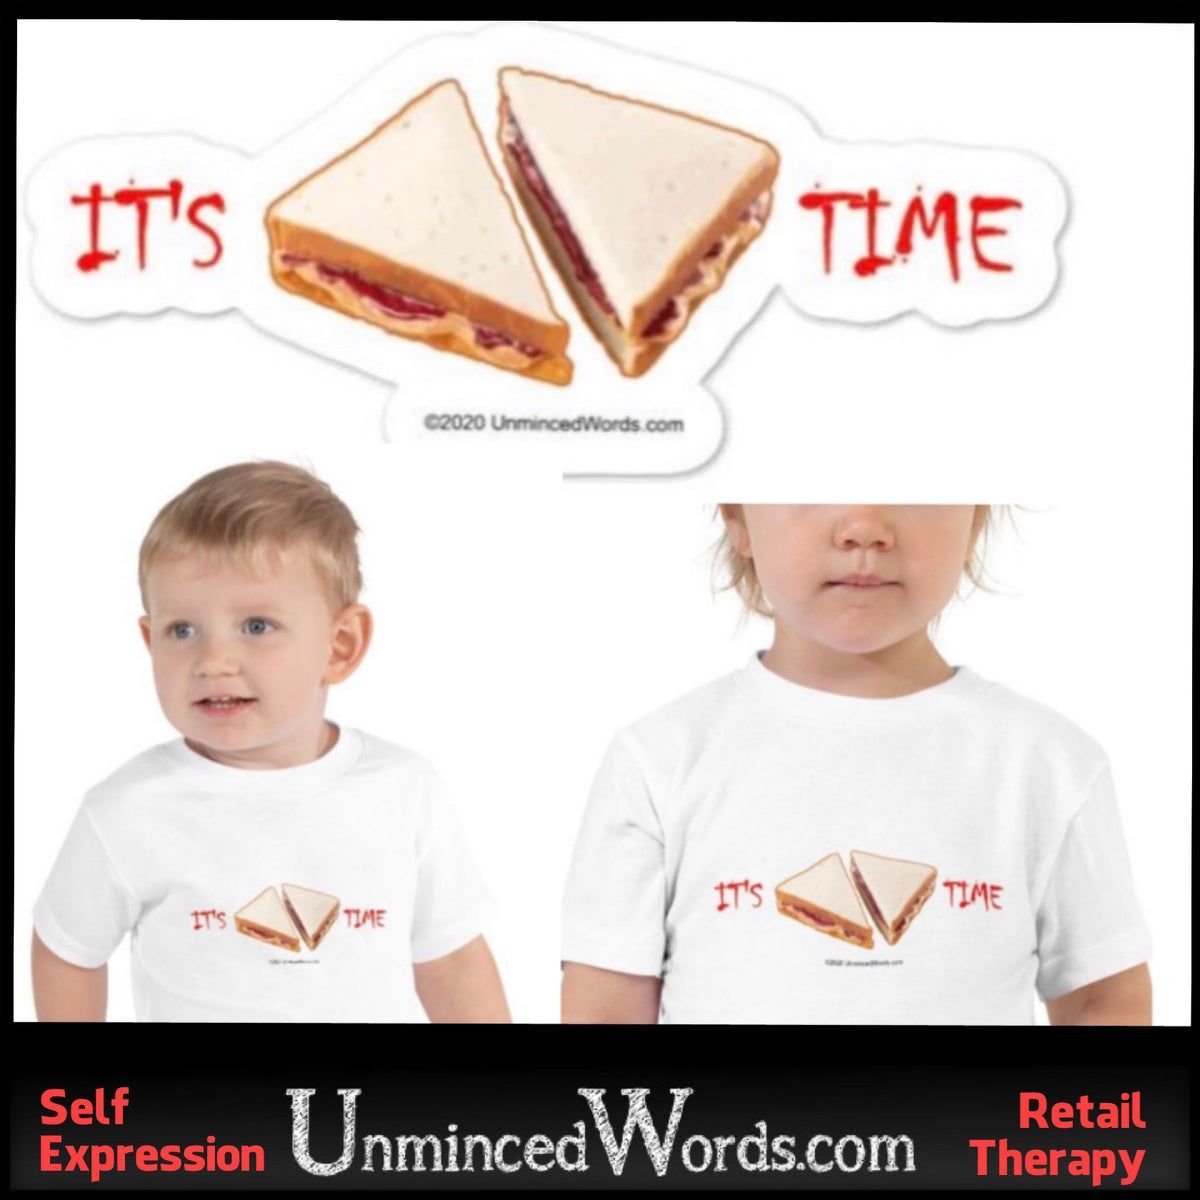 IT’S PEANUT BUTTER JELLY TIME! unmincedwords.com/blogs/news/it-…
Pour some milk or coffee into our mug & commemorate the greatest sandwich.

#pbandj #peanutbutter jelly #jam #peanutbutterandjelly #peanutbutterjellytime #sandwich #sandwiches #kidgift #coffeemug #yum #lunch #kids